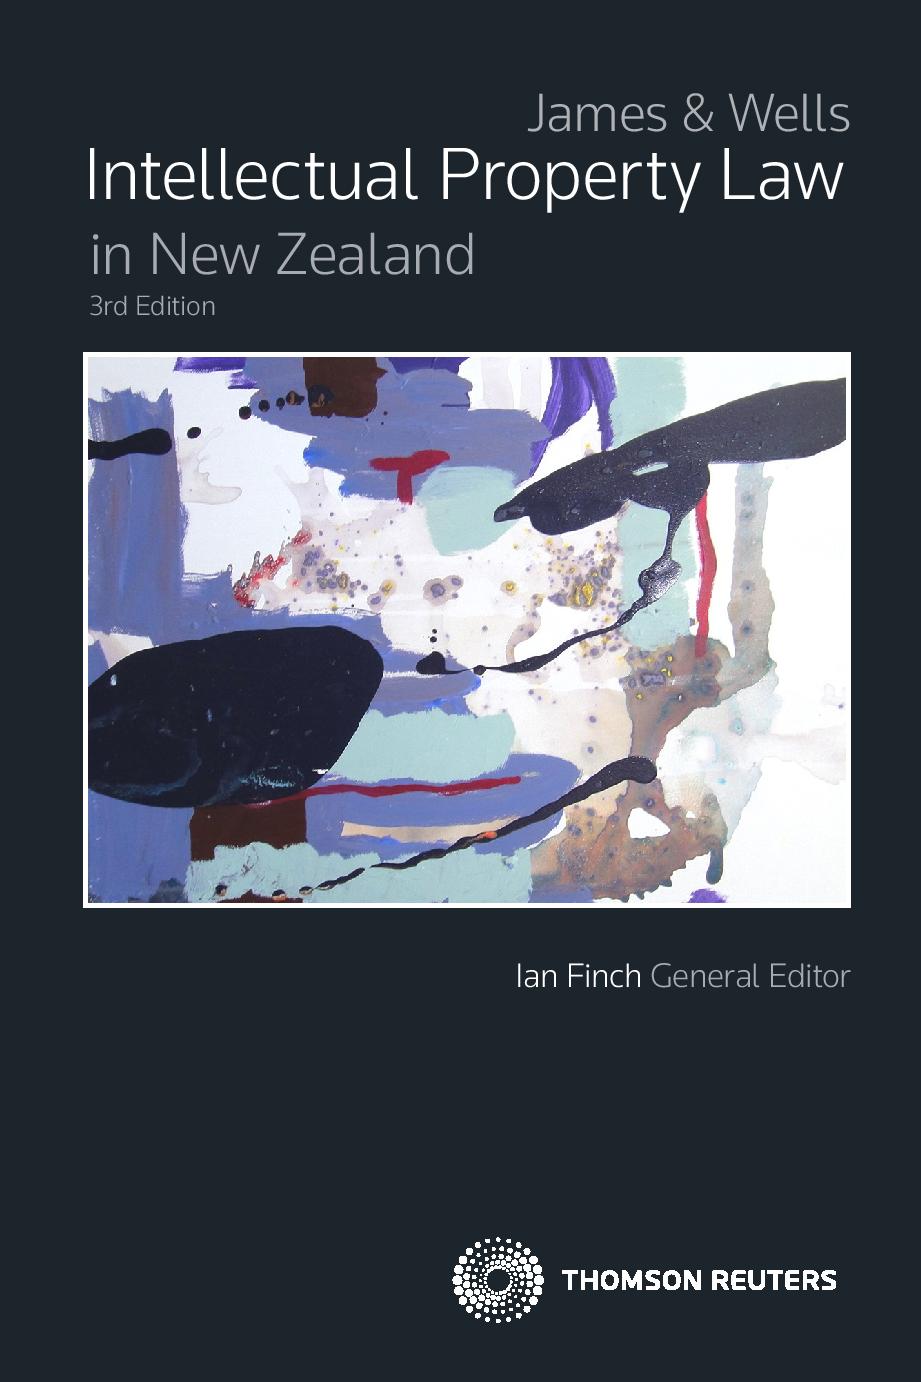 James & Wells Intellectual Property Law in New Zealand - 3rd Edition (Book)